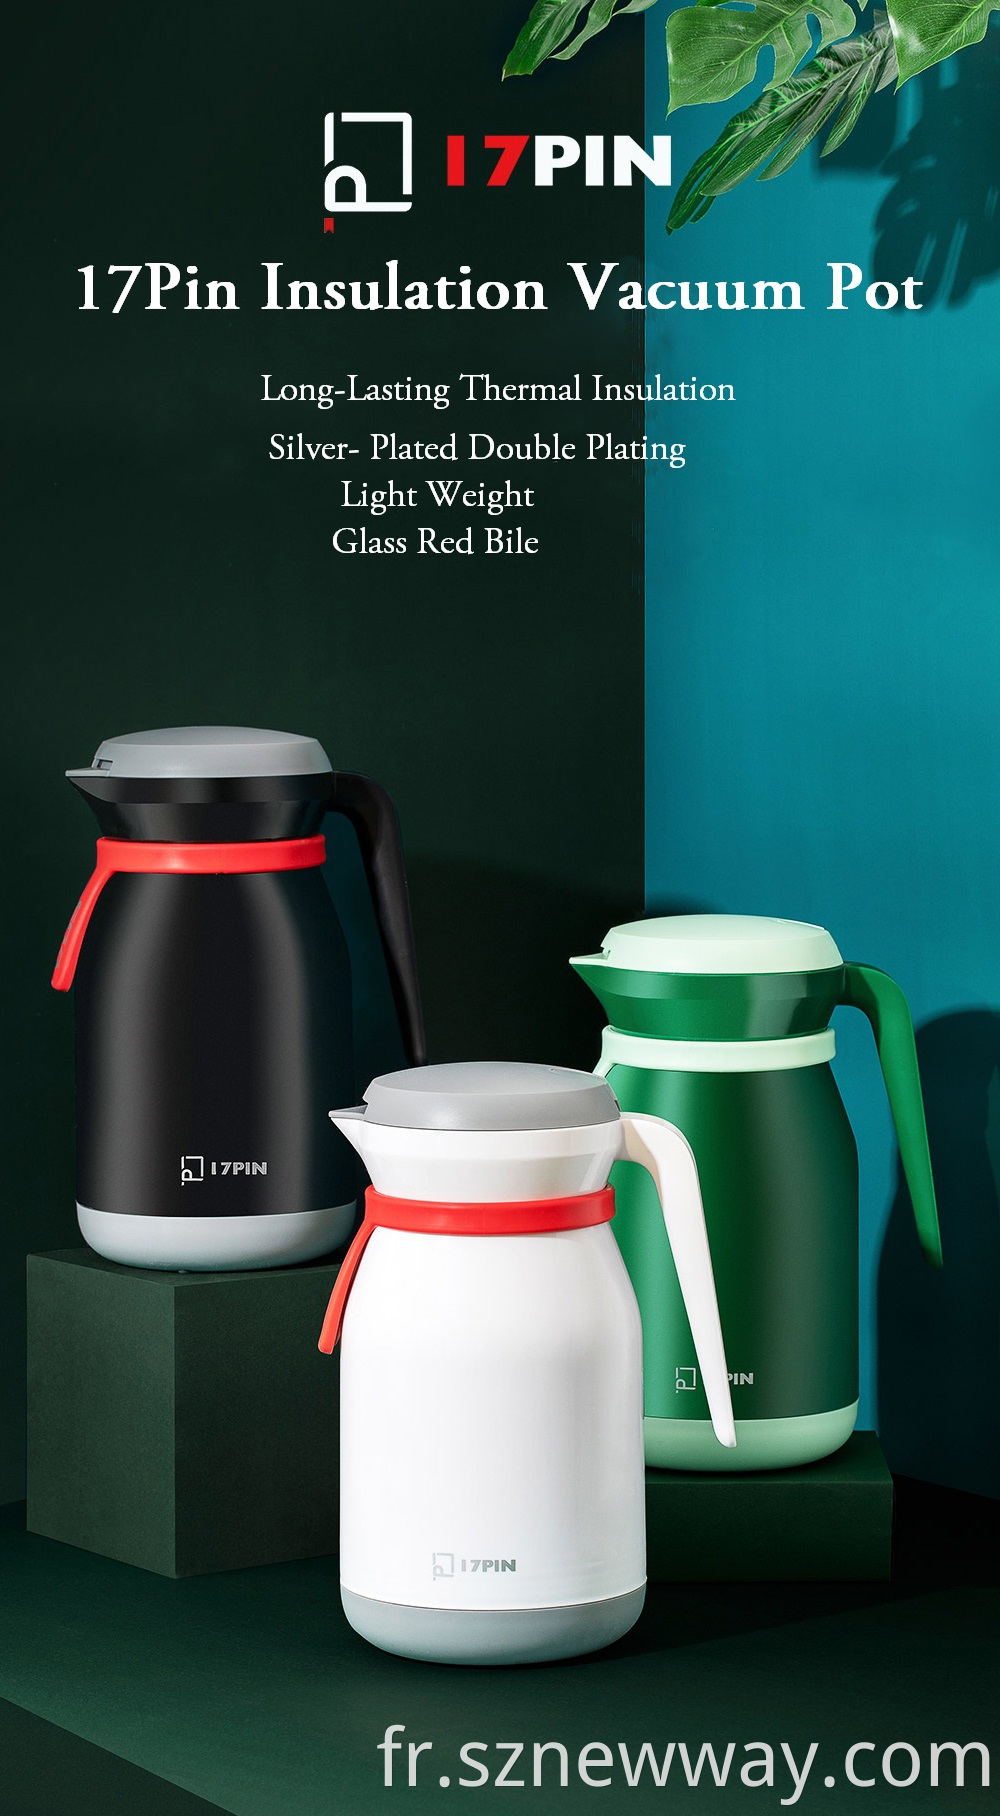 17pin Electric Kettle